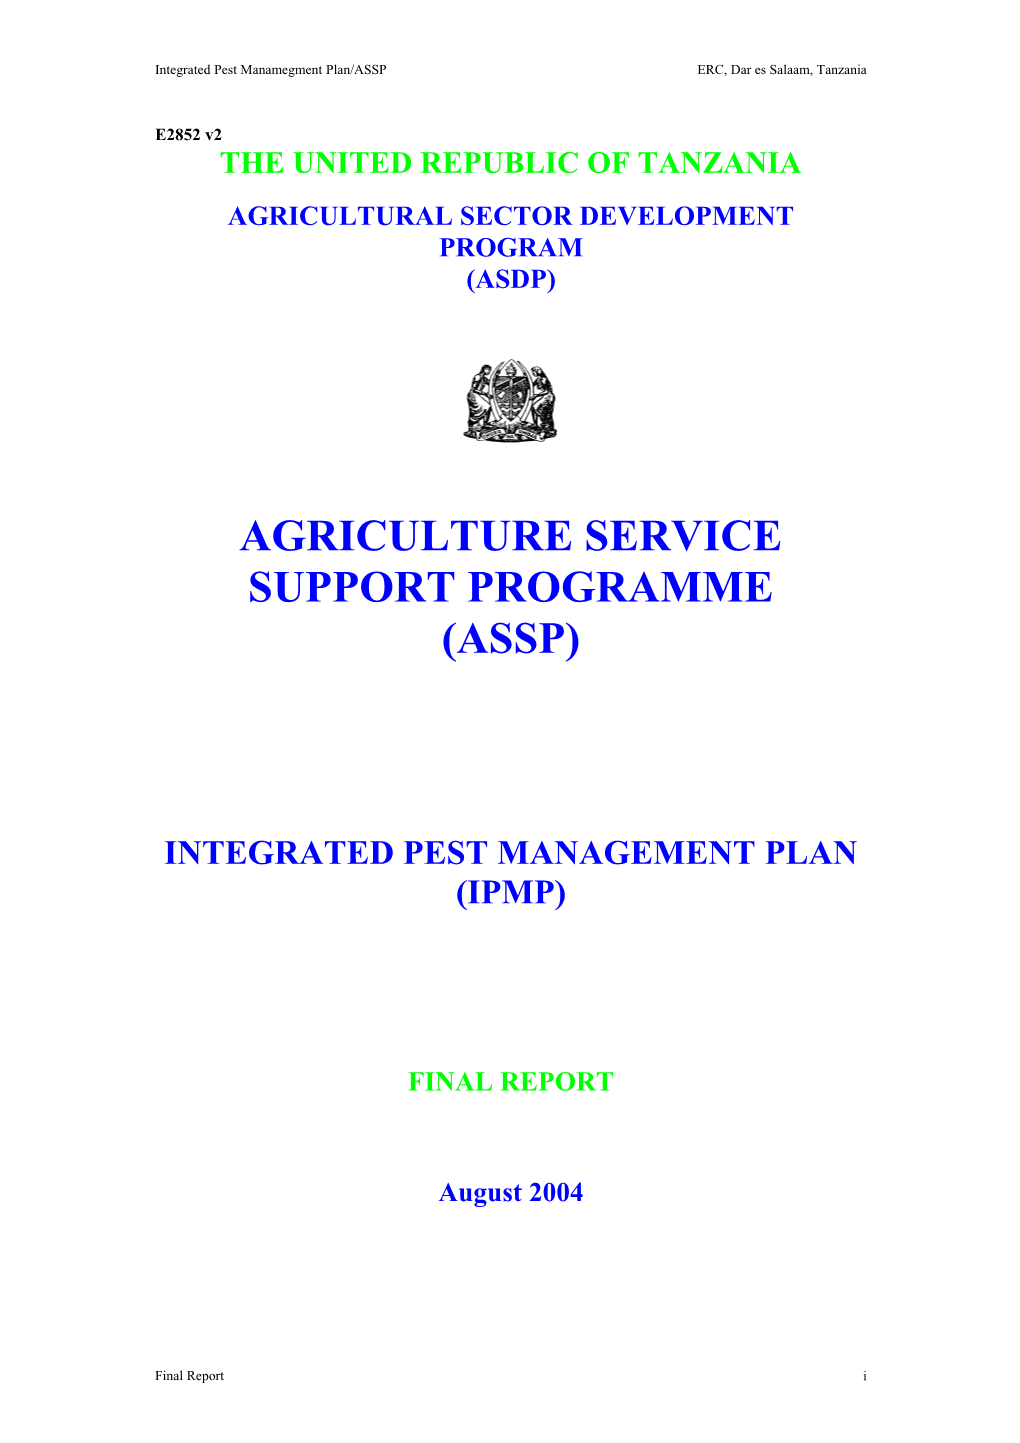 Table of Contents (IPM)